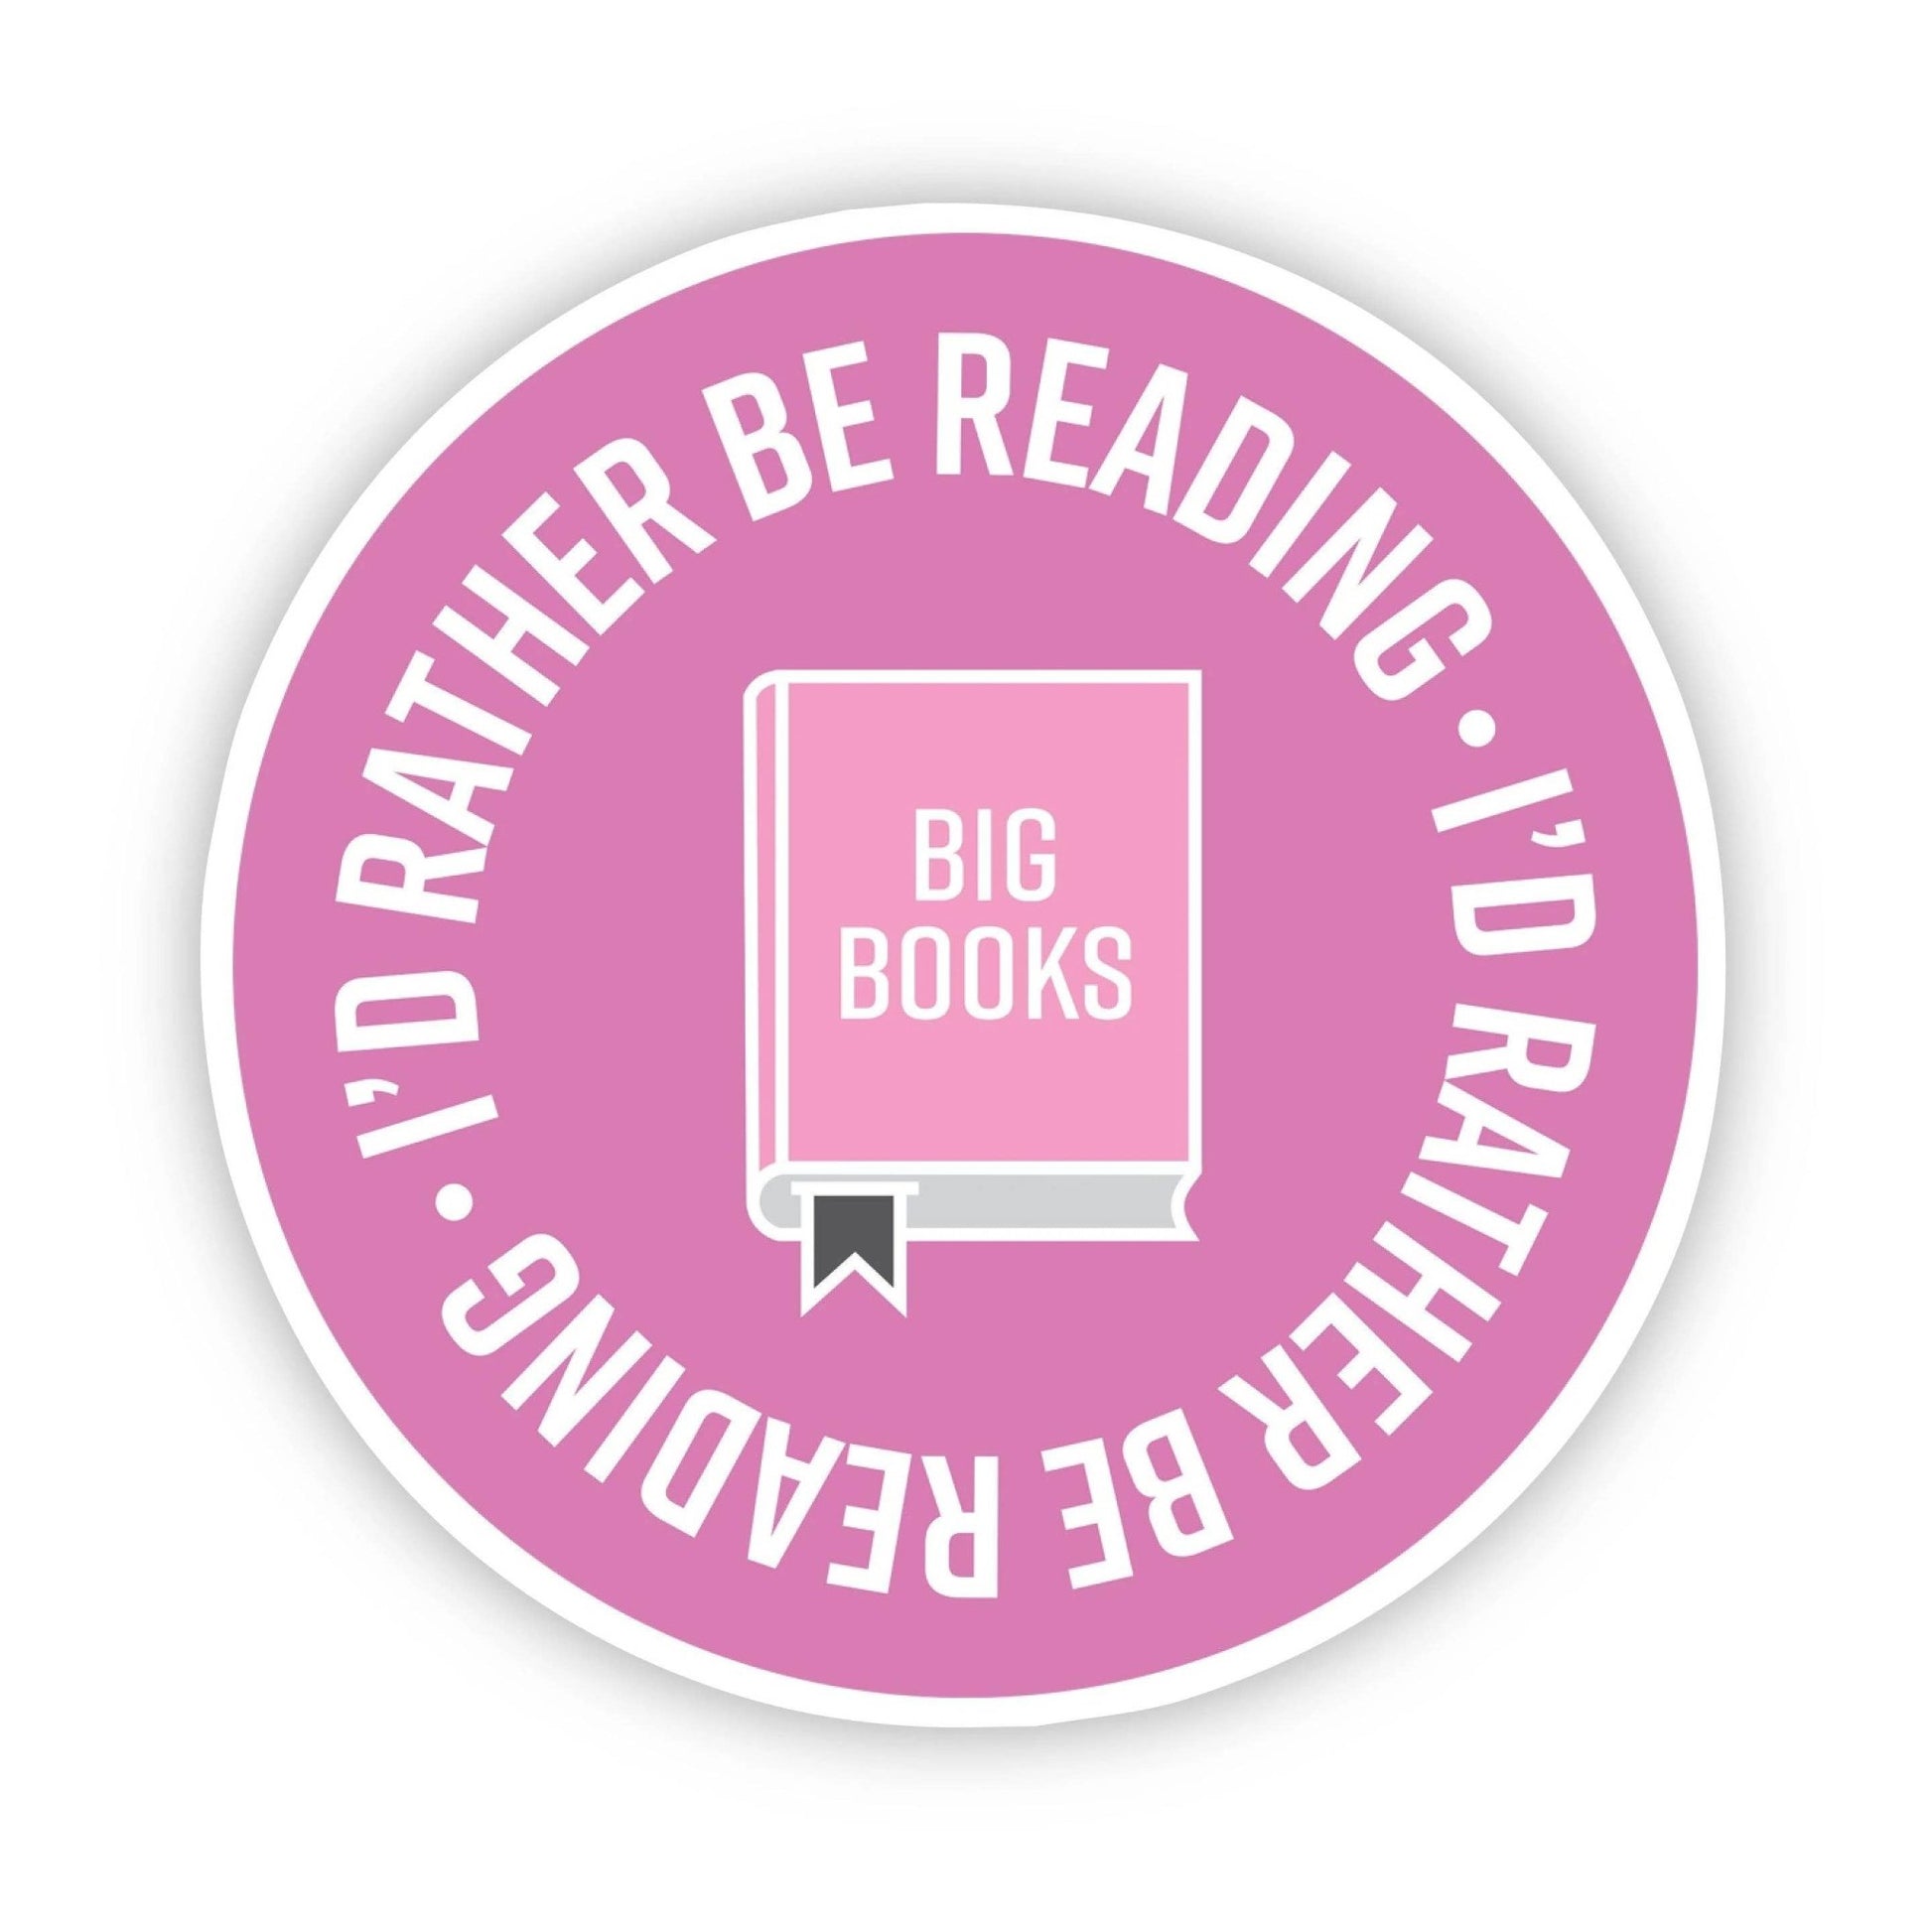 I'd Rather be Reading Sticker - [ash-ling] Booksellers